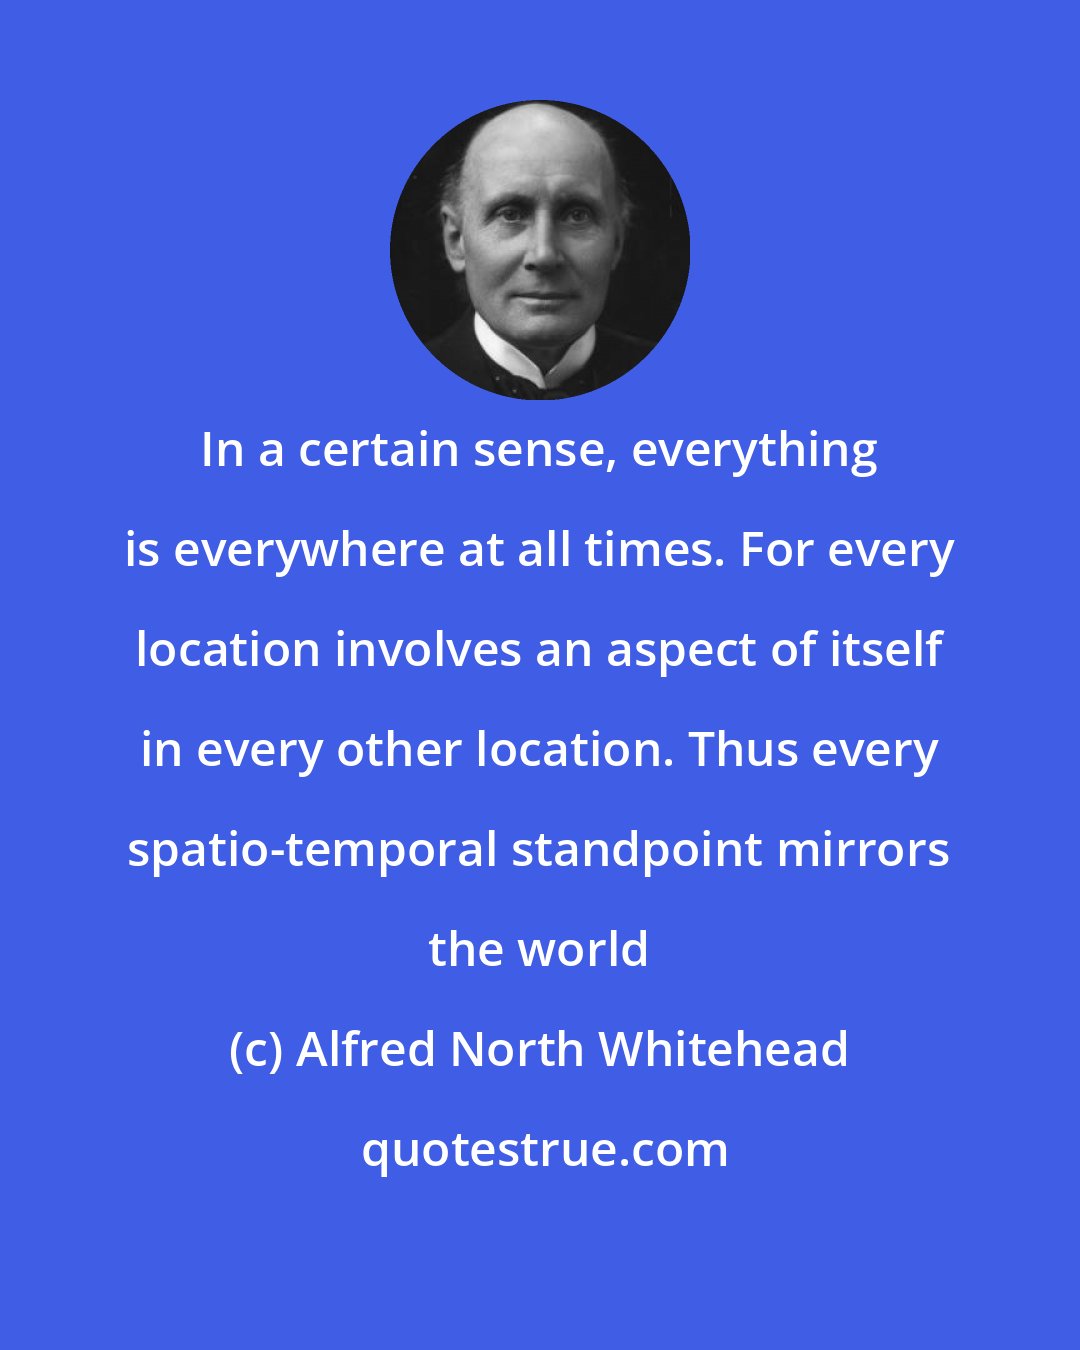 Alfred North Whitehead: In a certain sense, everything is everywhere at all times. For every location involves an aspect of itself in every other location. Thus every spatio-temporal standpoint mirrors the world